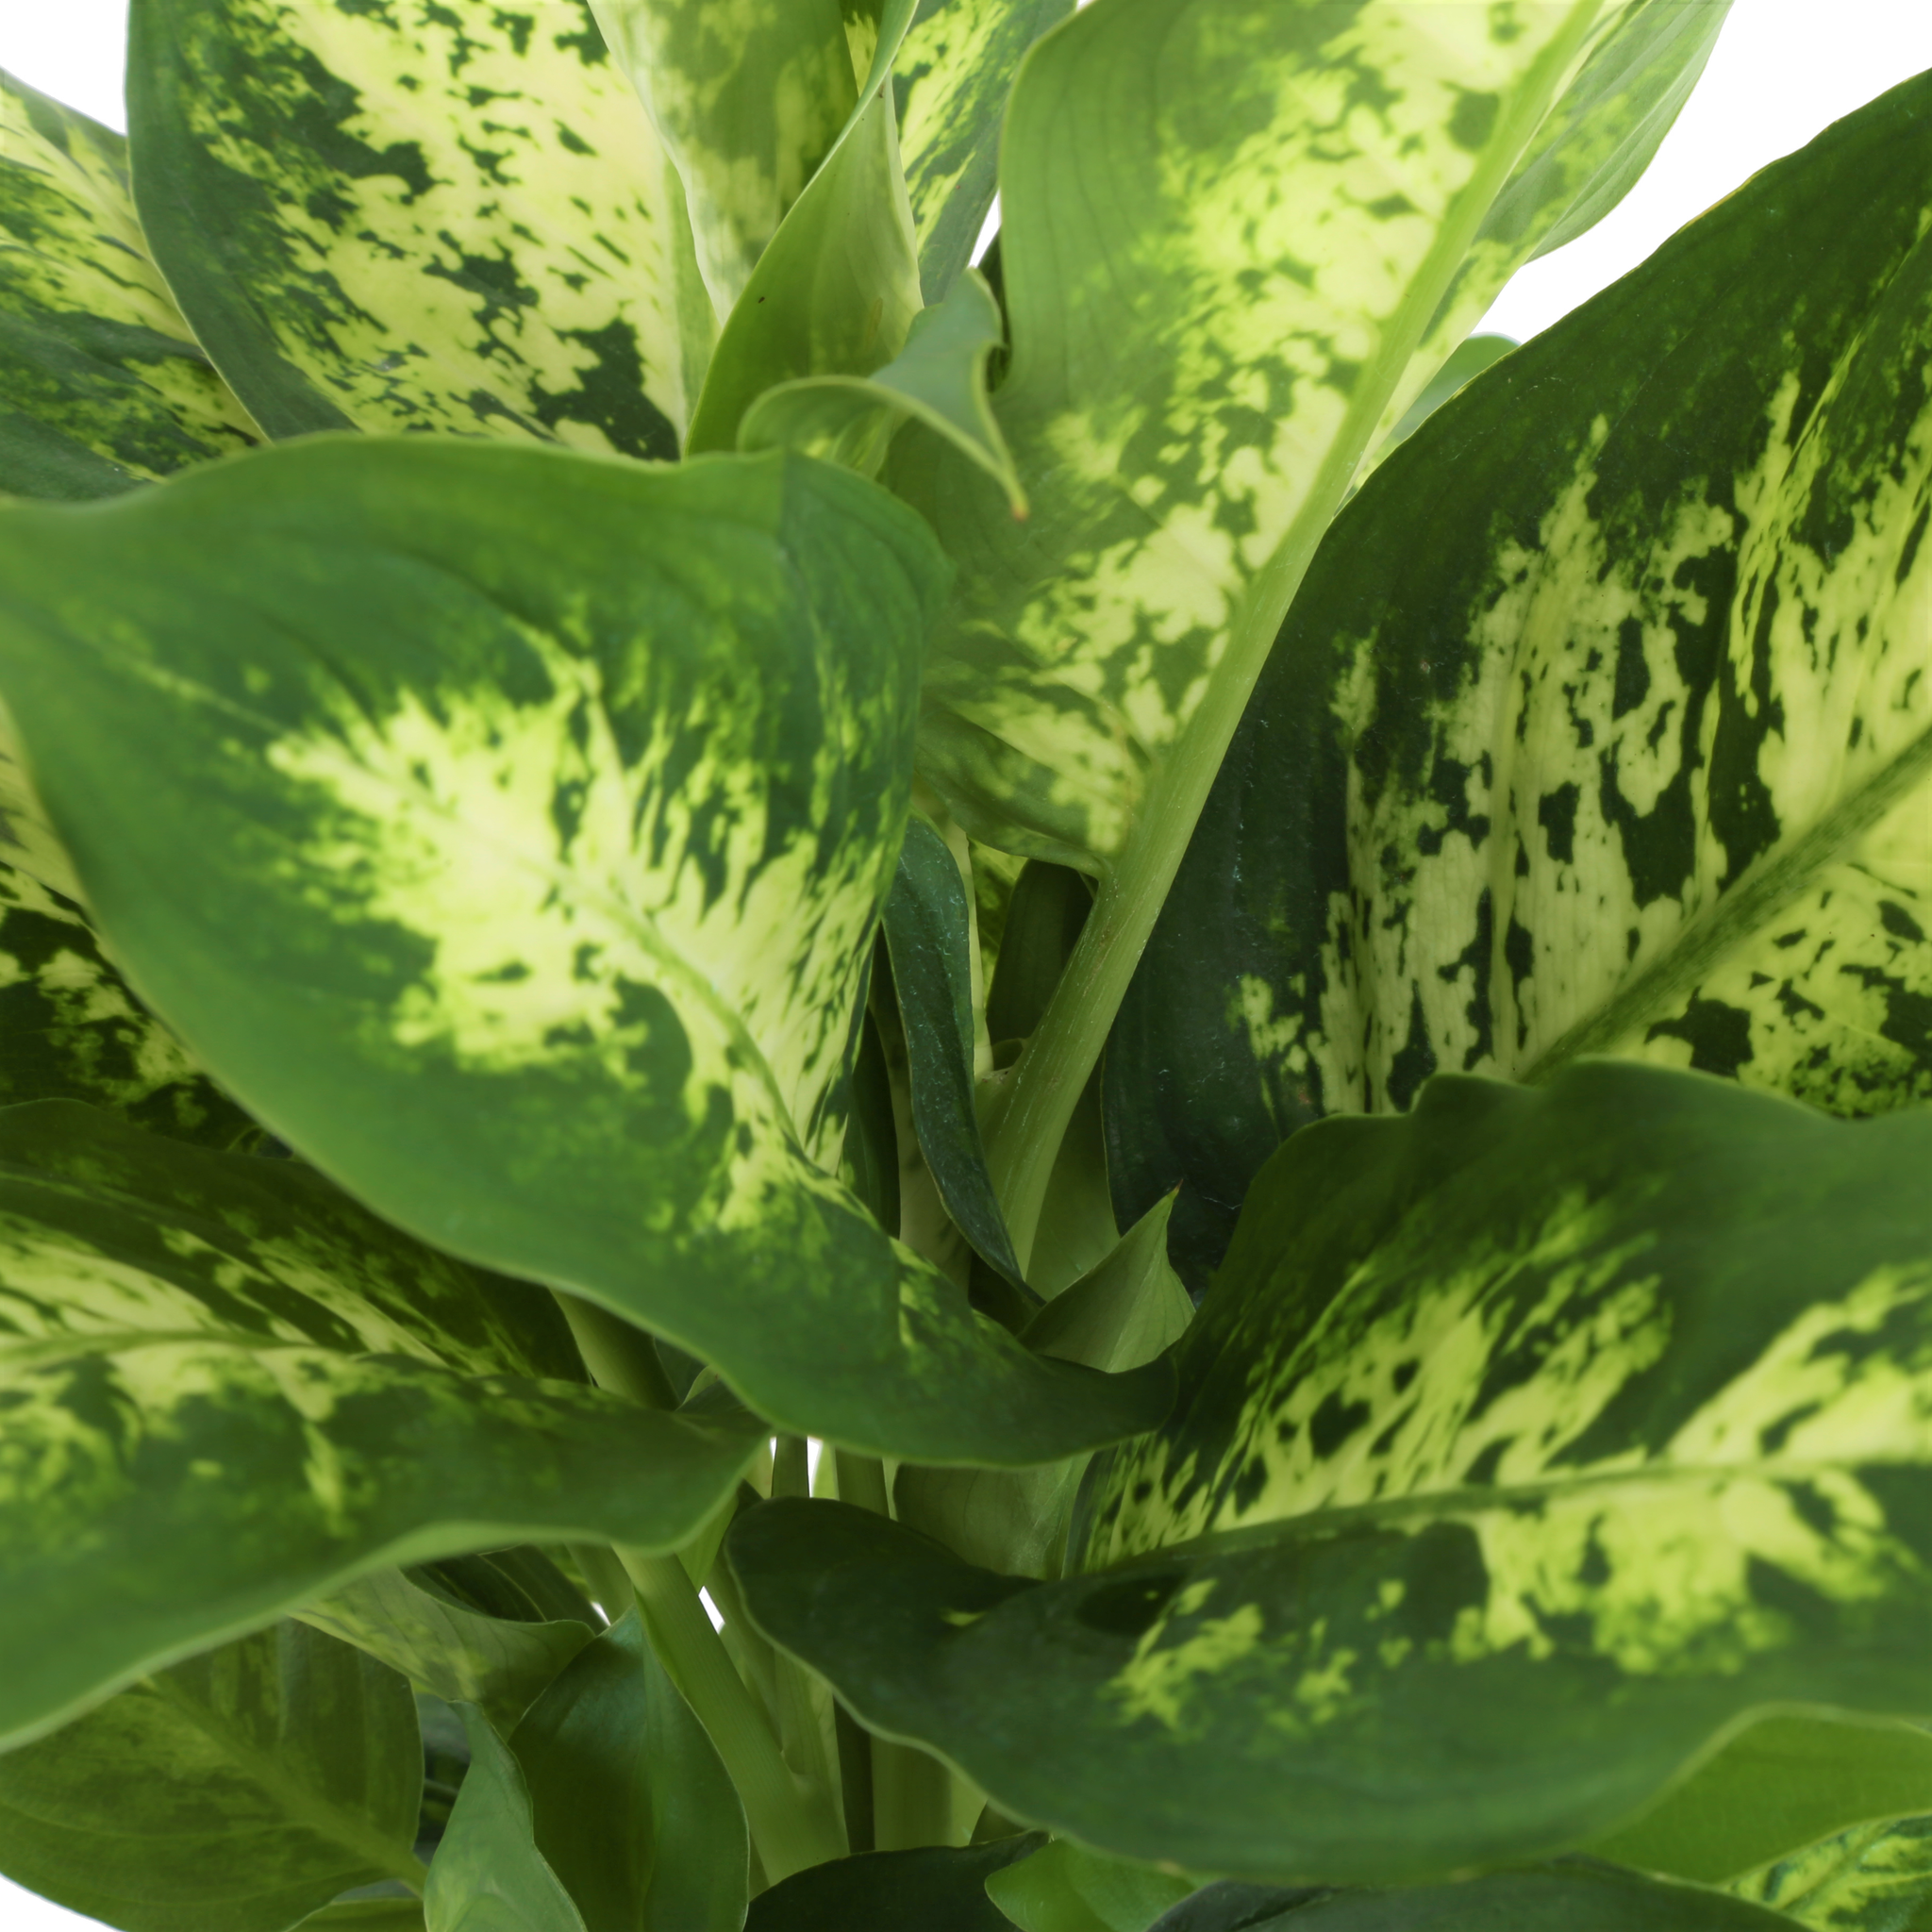 detailed close up of dieffenbachia leaves to showcase green and yellow-green coloration of leaves